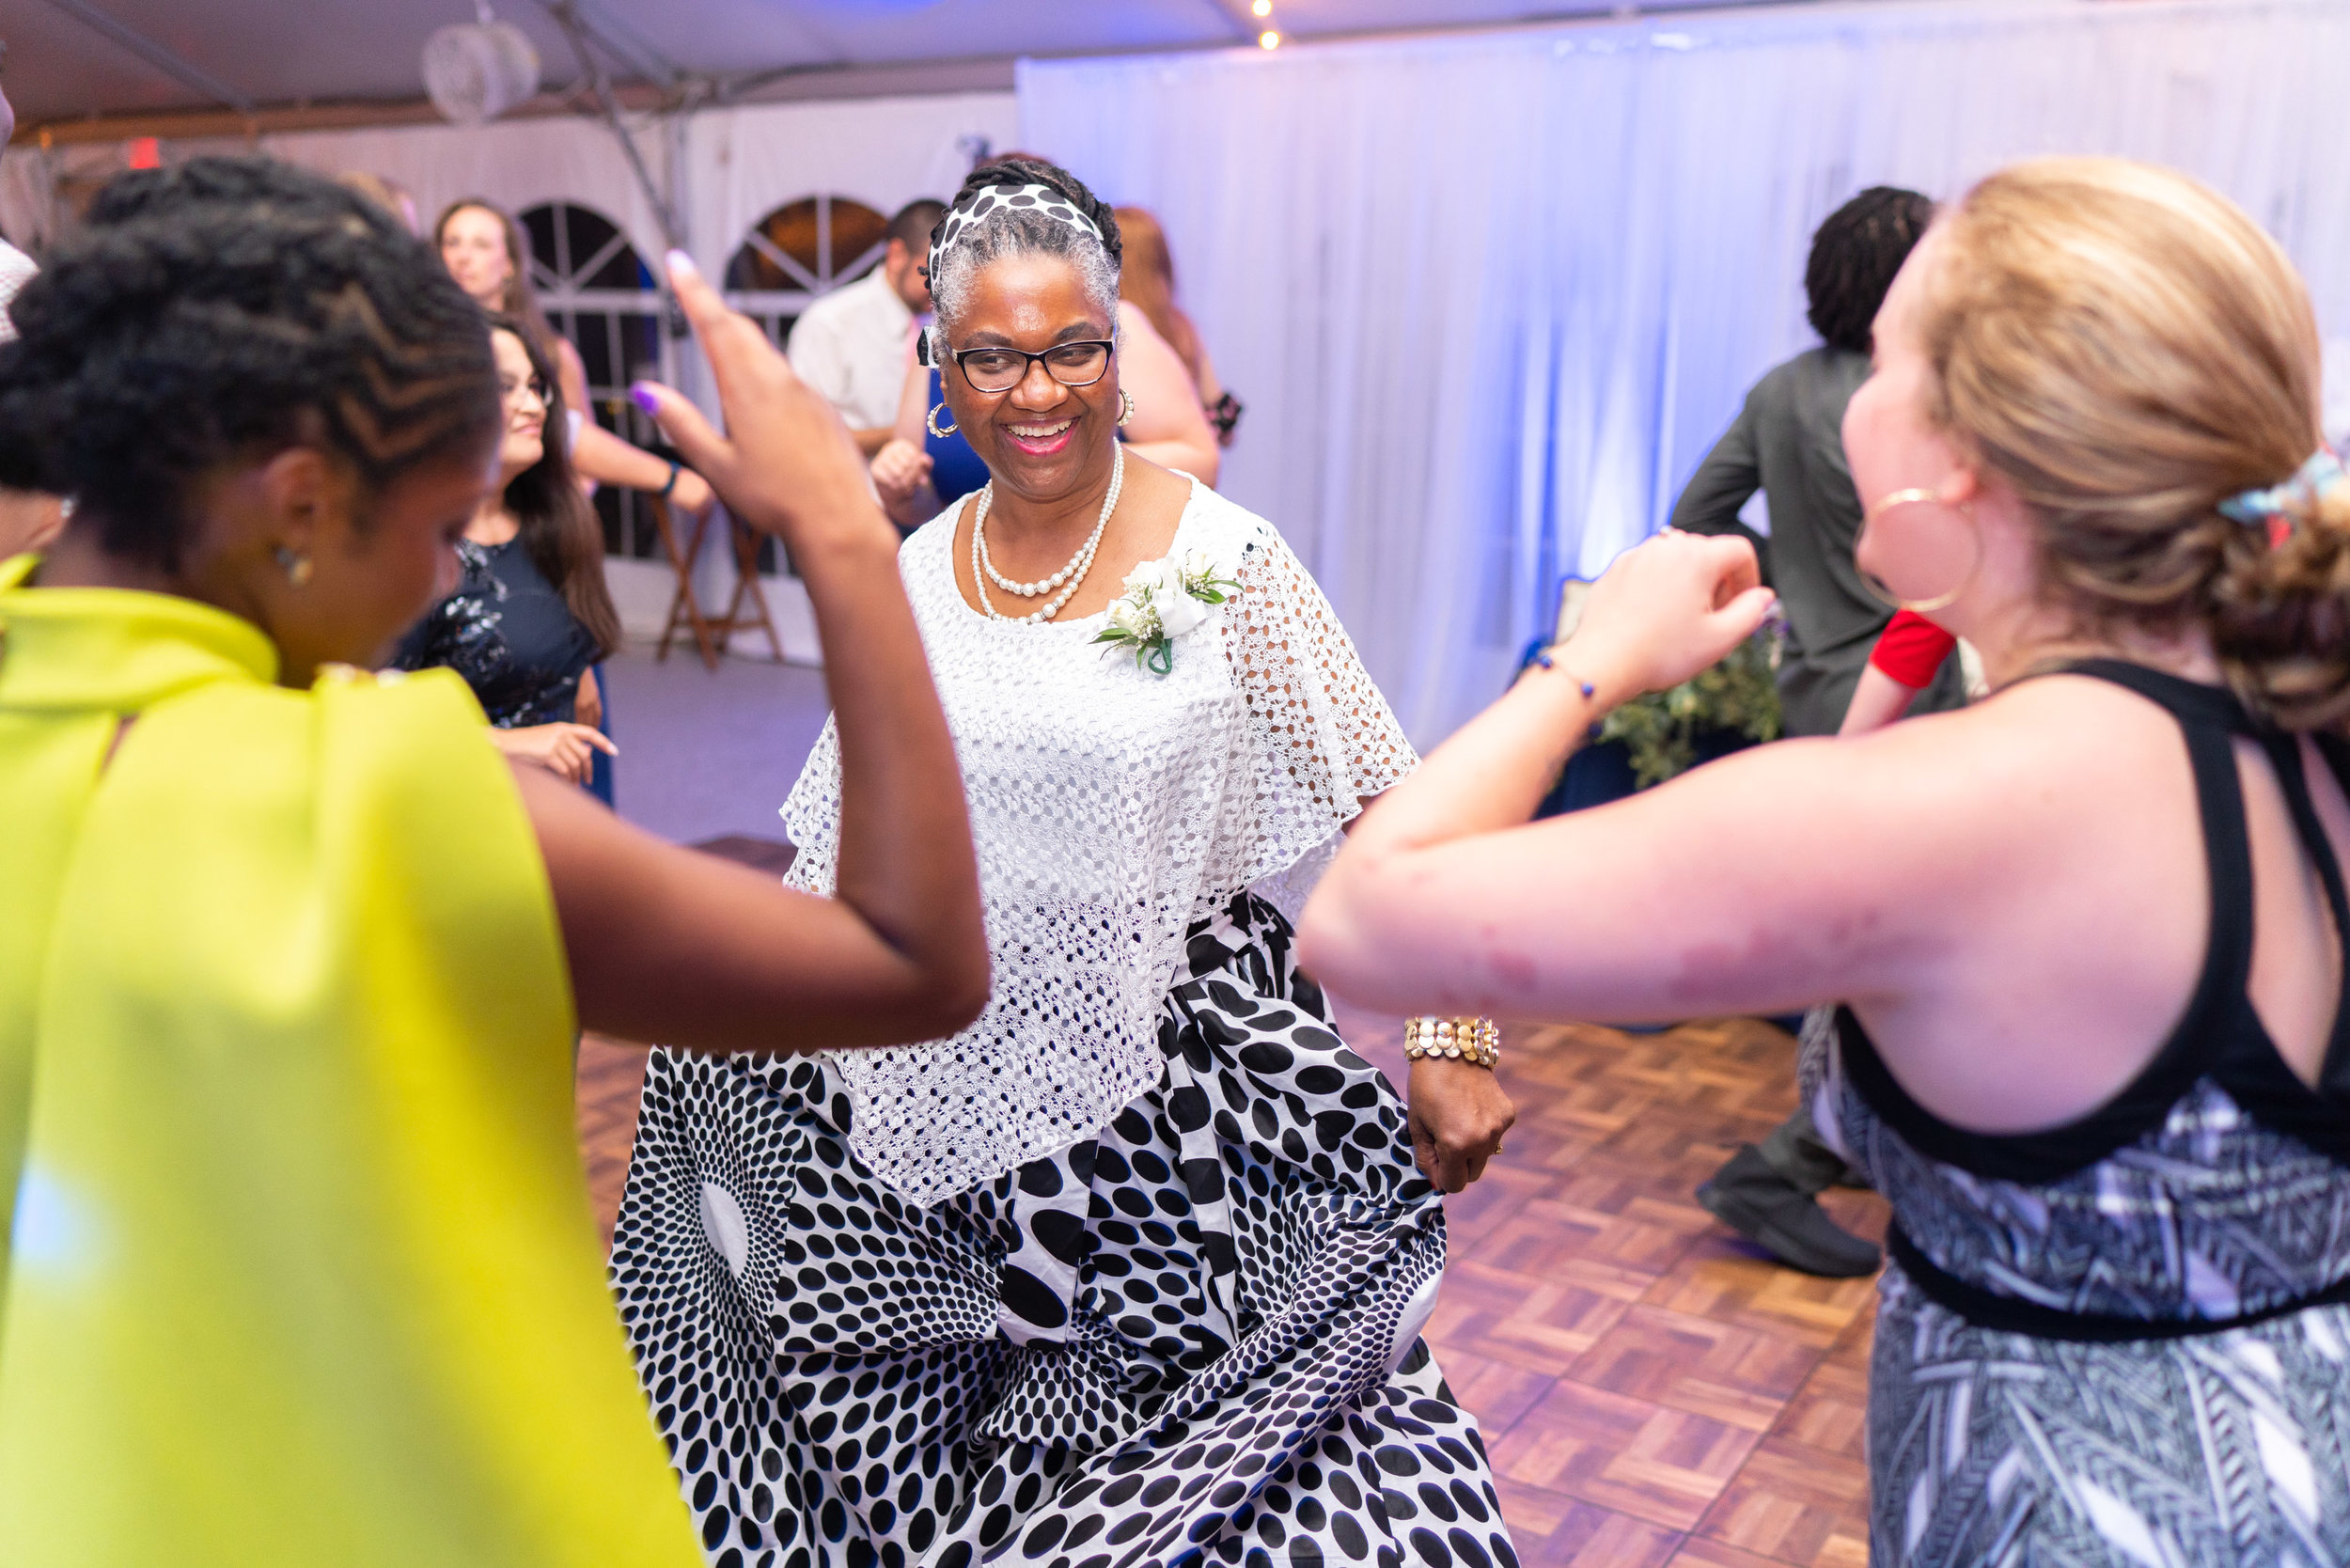 Guests dancing in colorful dresses on the dance floor at Rust Manor House